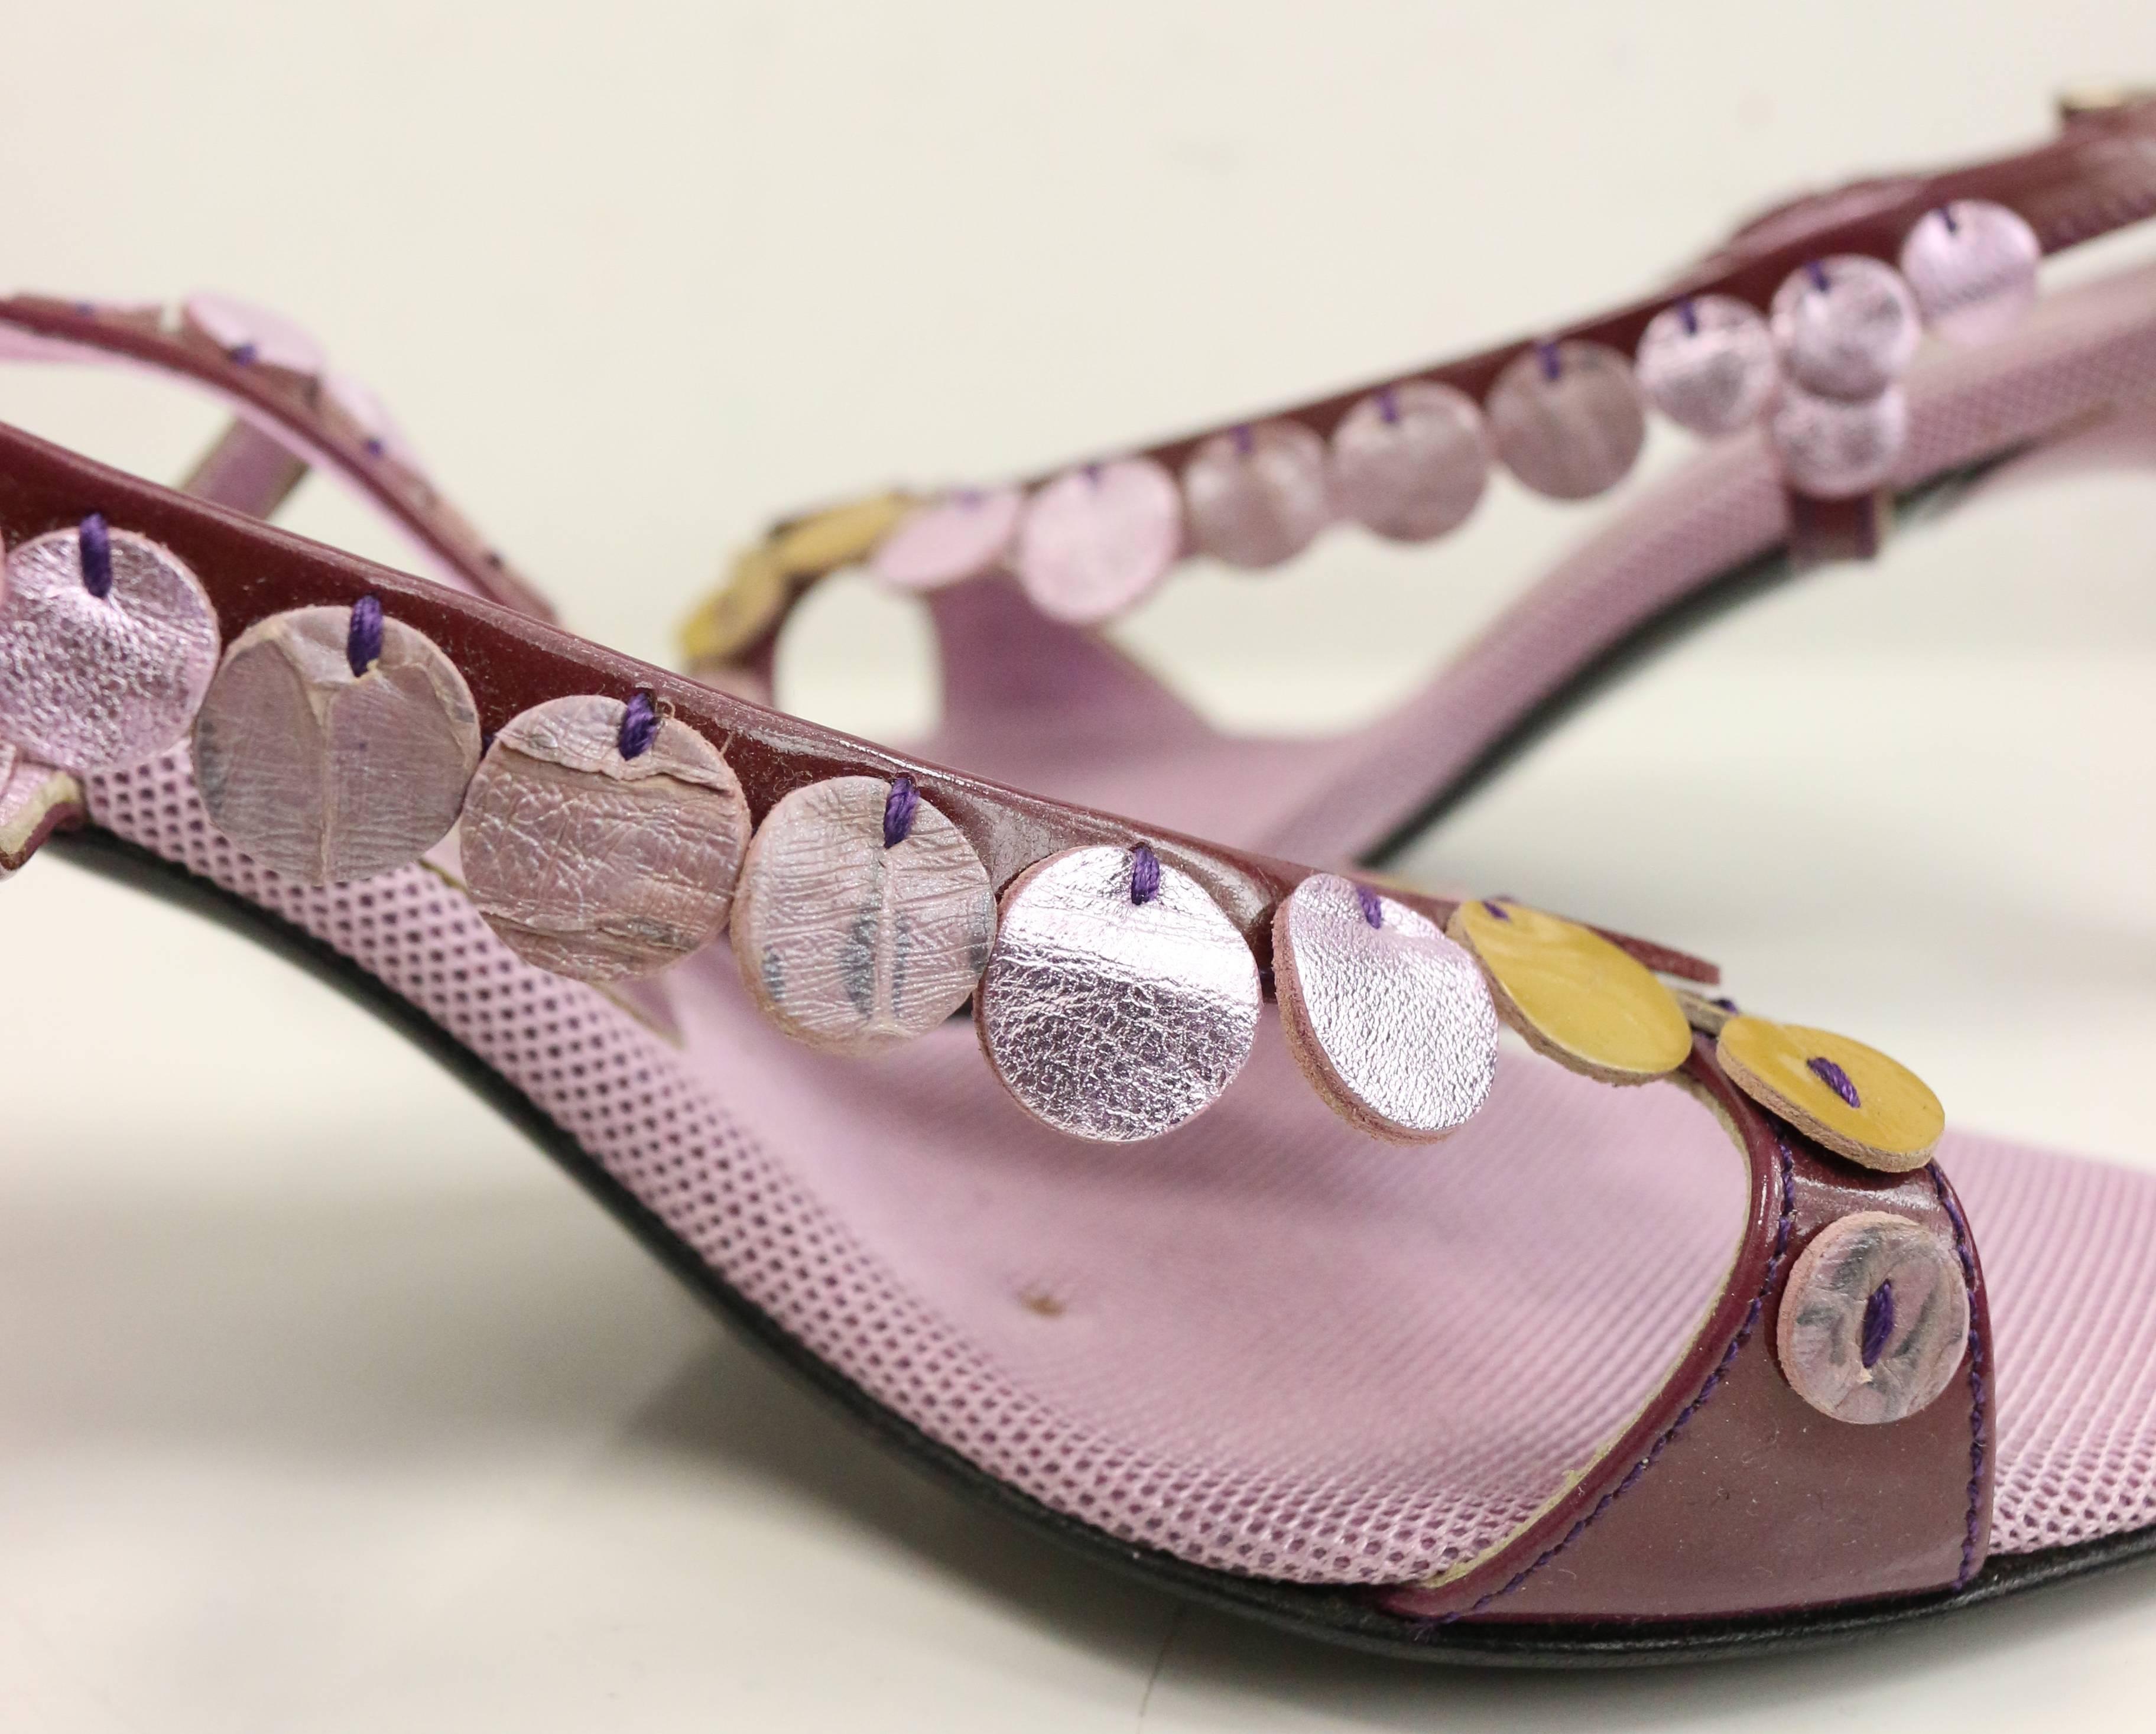 - Vintage 90s Prada purple metallic leather sequins sandals. Featuring metallic purple leather, shiny beige leather sequins trim patent straps. Combination of mesh and metallic interior and purple plastic heels. Using different colours and materials